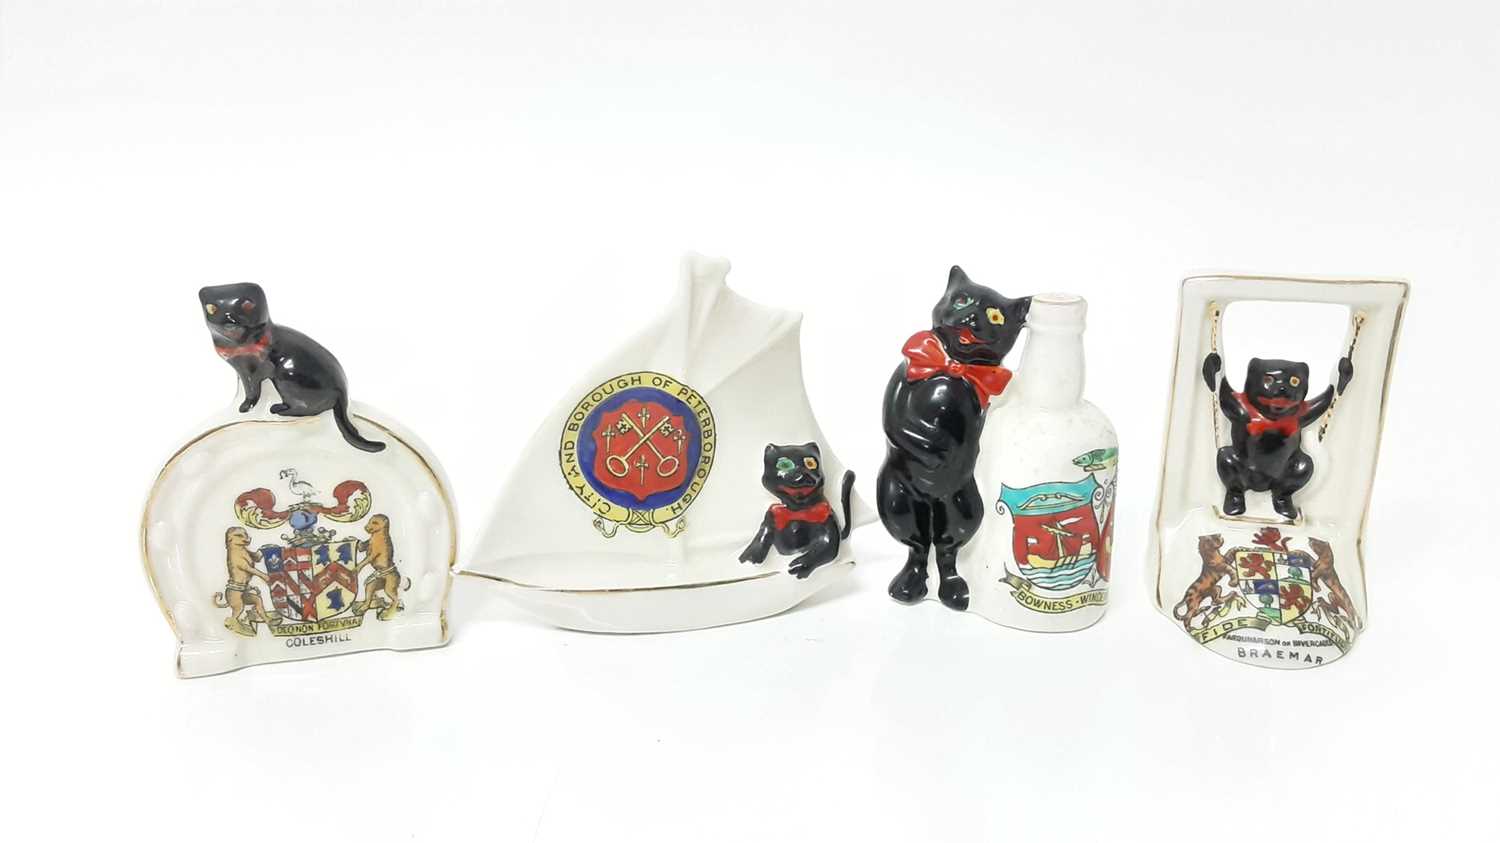 Lot 145 - Four Arcadian Crested China Black Cats - Bowness Windermere, City Borough of Peterborough, Braemar and Coleshill